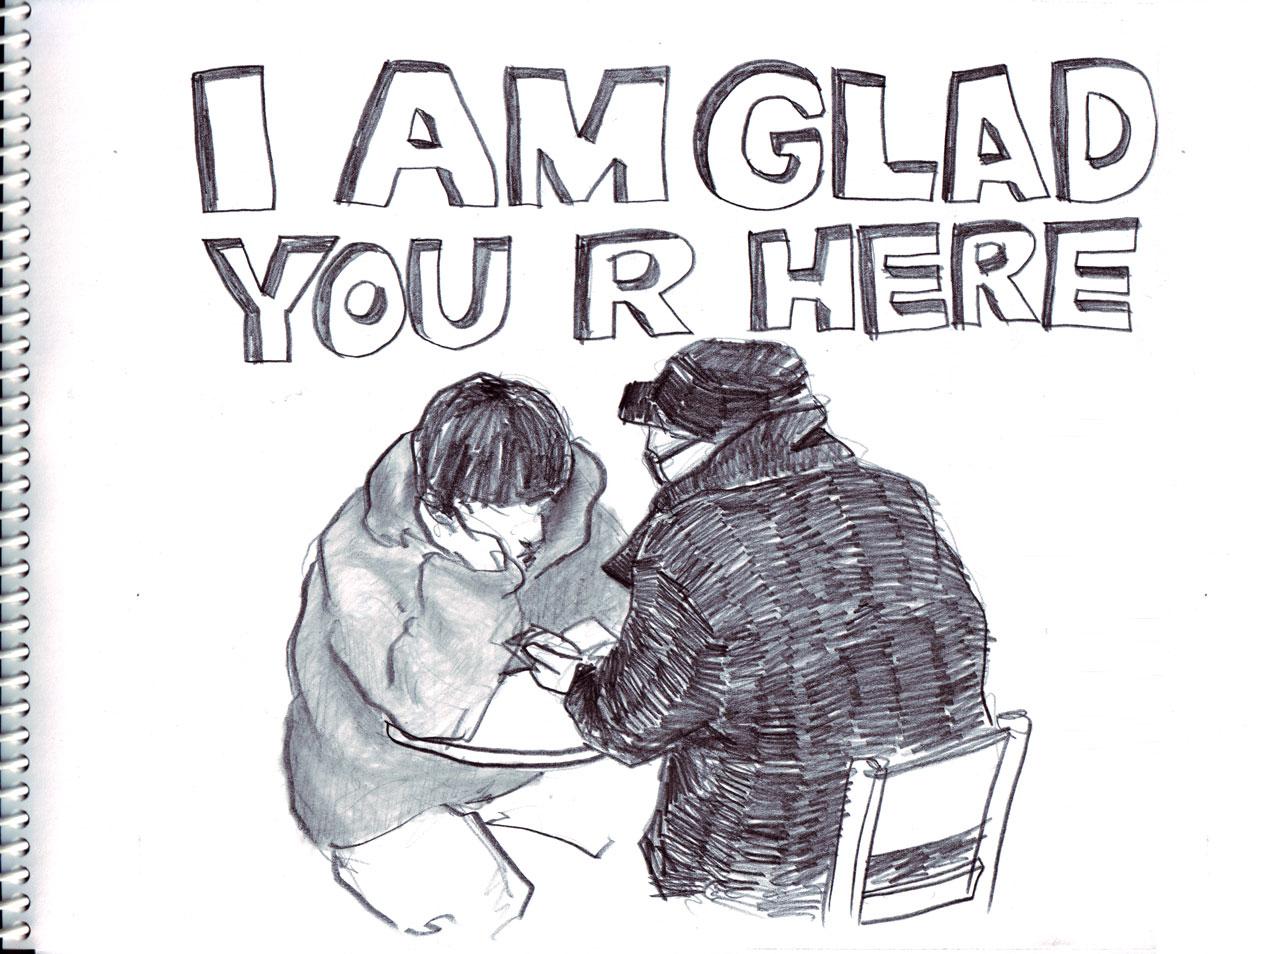 Glad you are here